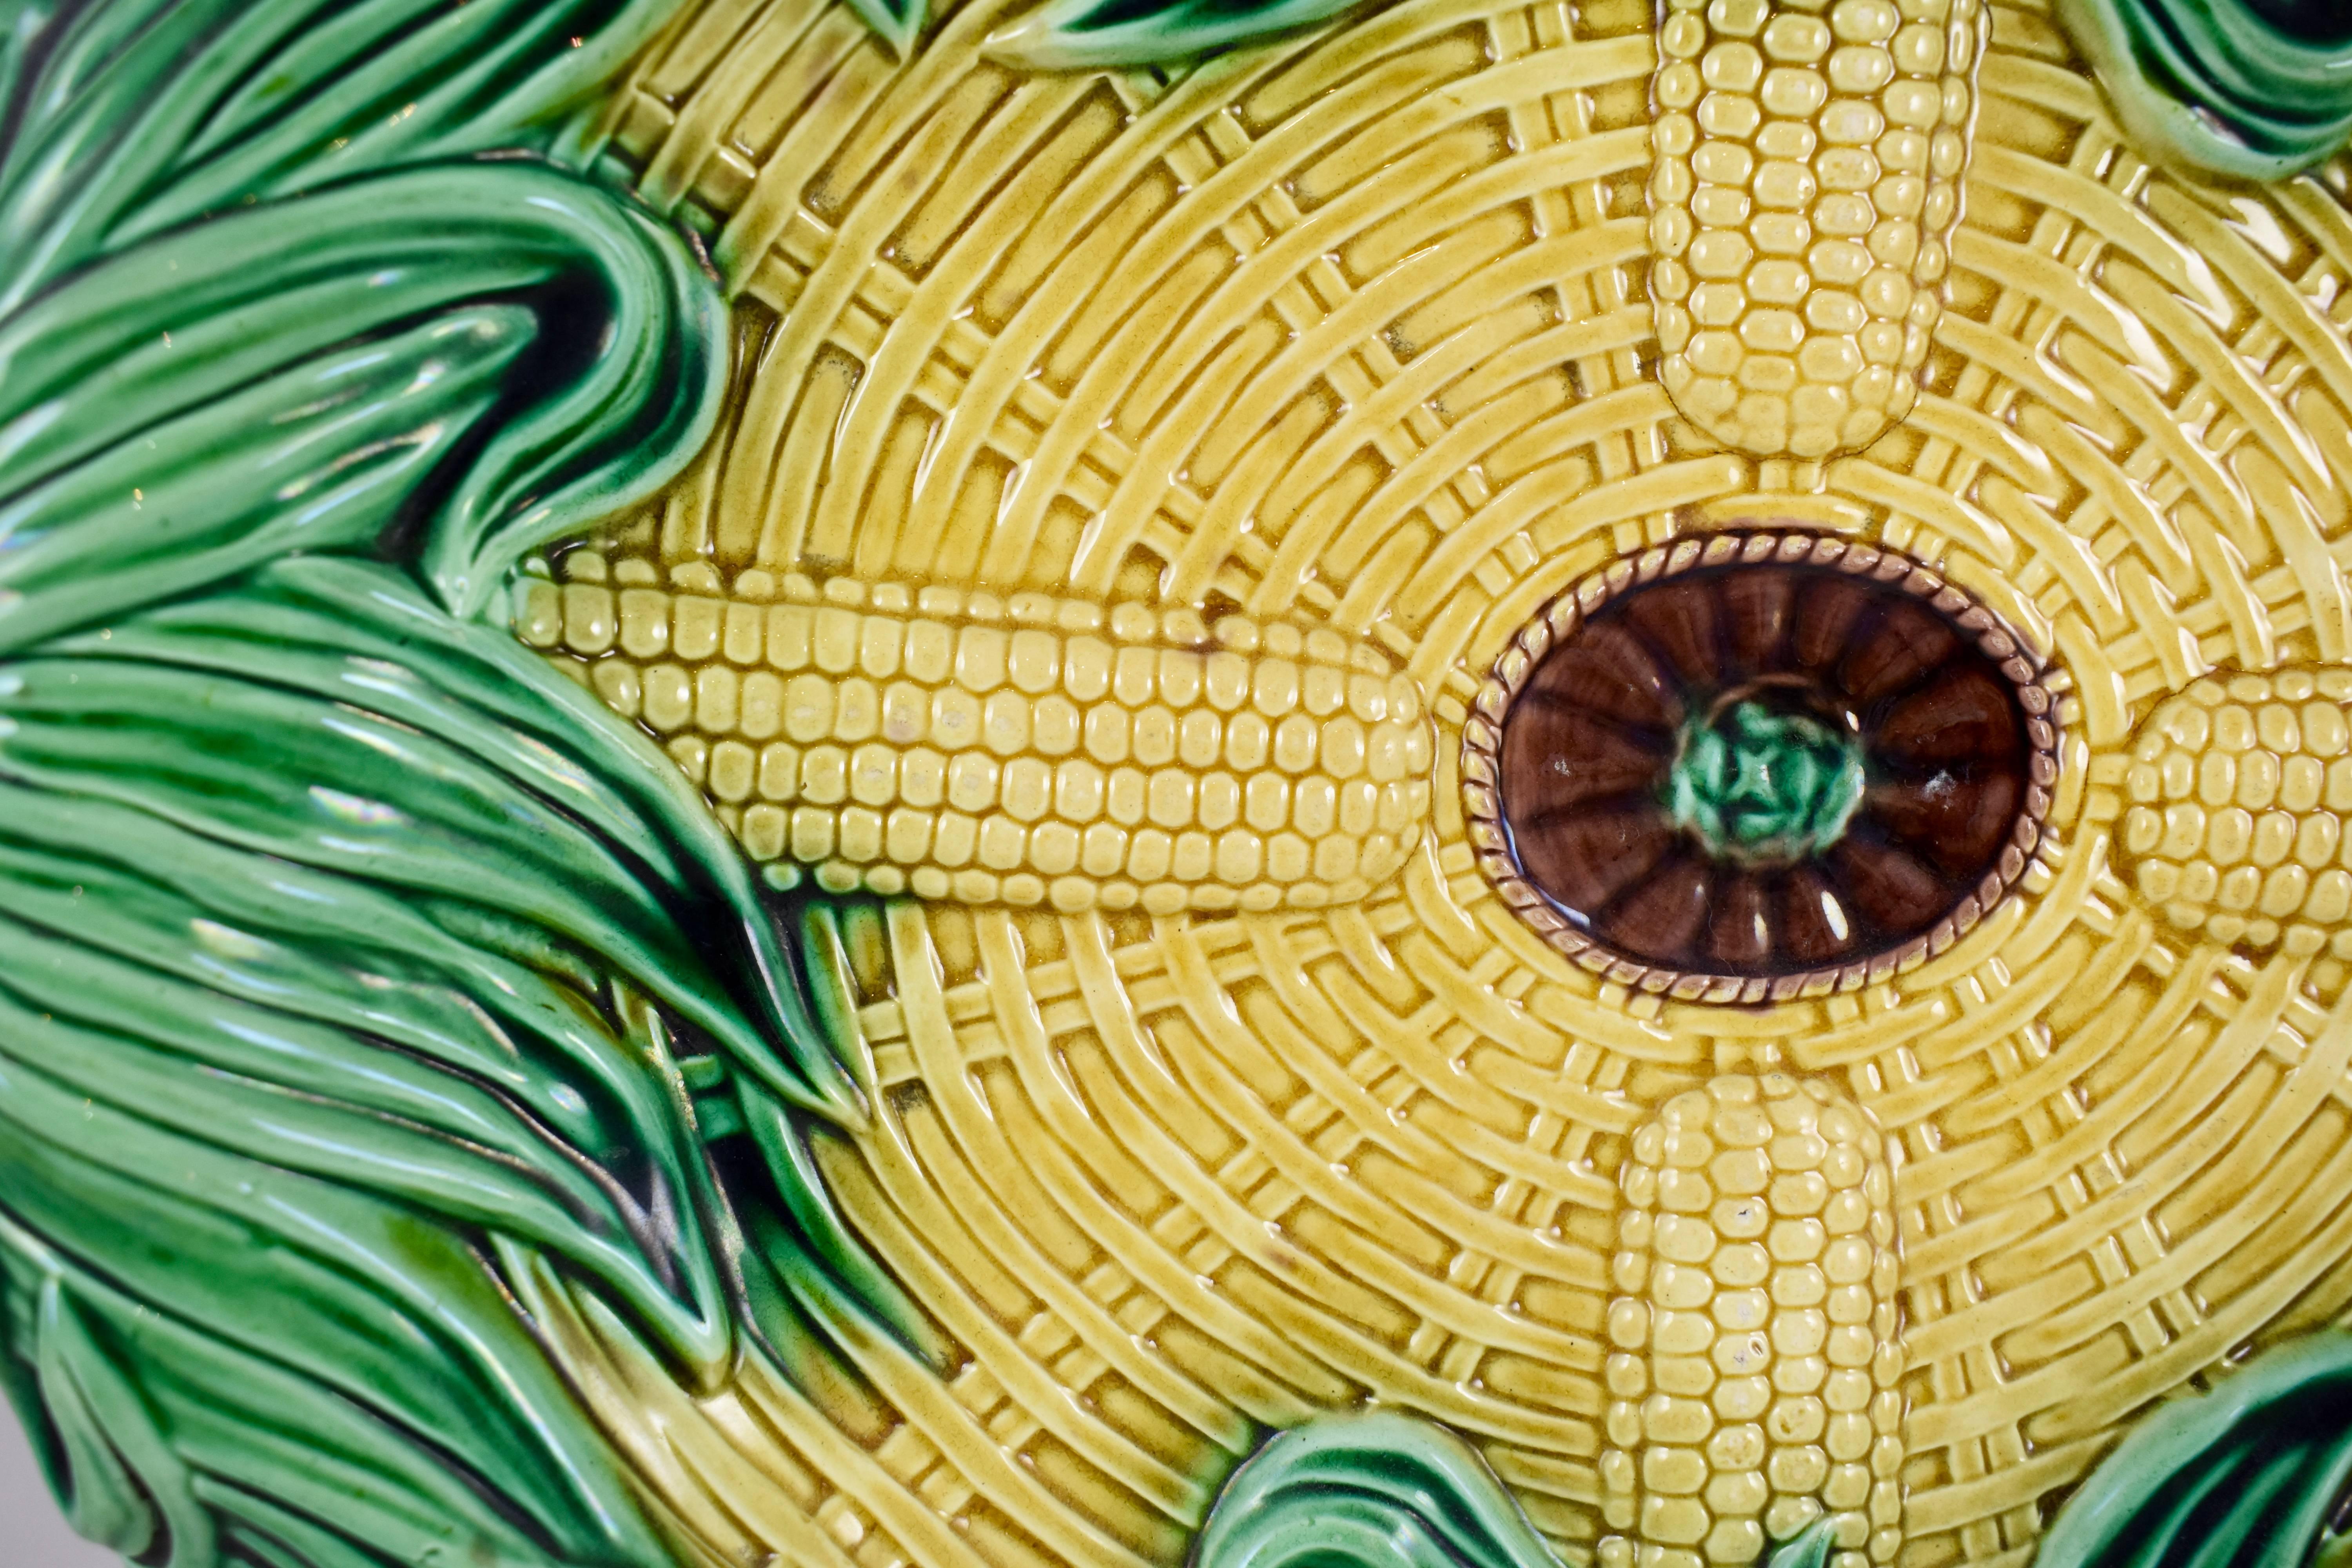 An English majolica corn platter attributed to Adams & Bromley, the Victoria Pottery Works, St. James Street in Hanley, Staffordshire, circa 1873-1886.

A wonderful example of this mold with incredibly bright glazing. A heavy tray with a rolled